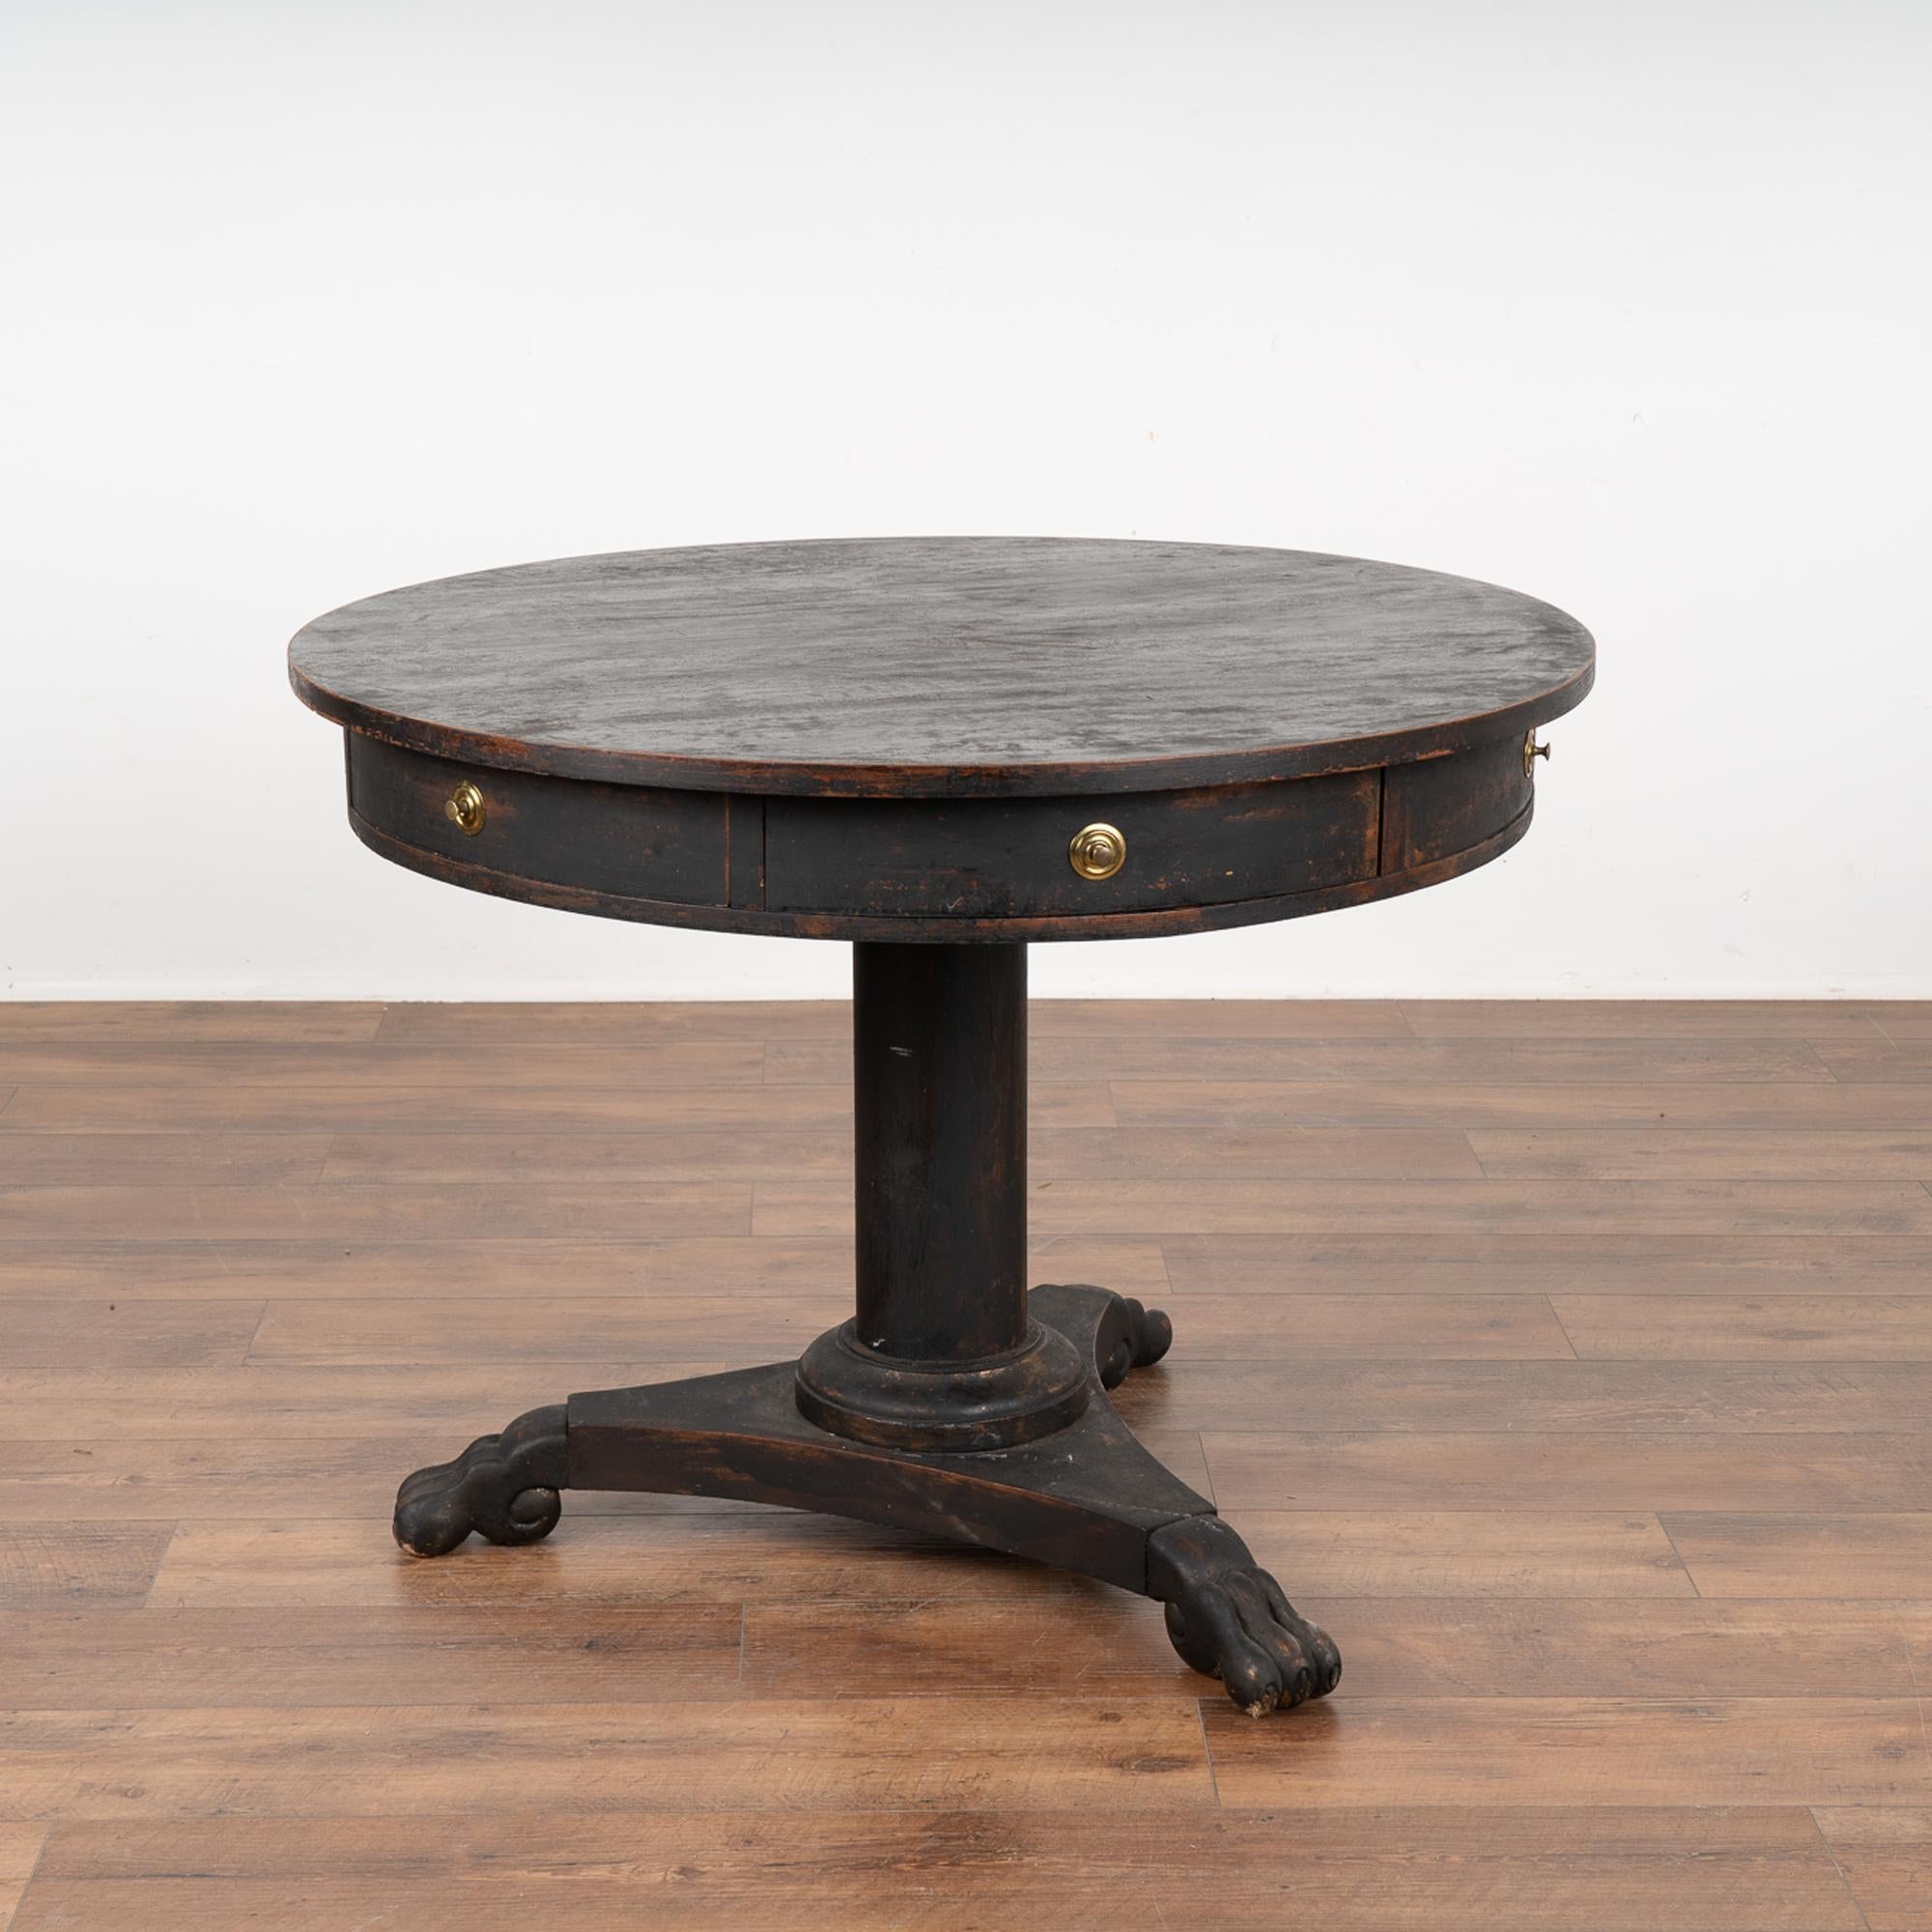 This drum table from Sweden is a special find. It has six drawers and rests on a pedestal base with three heavily carved and dramatic feet.
Later painted black, the slight distressing simple adds aged grace to this lovely occasional table.